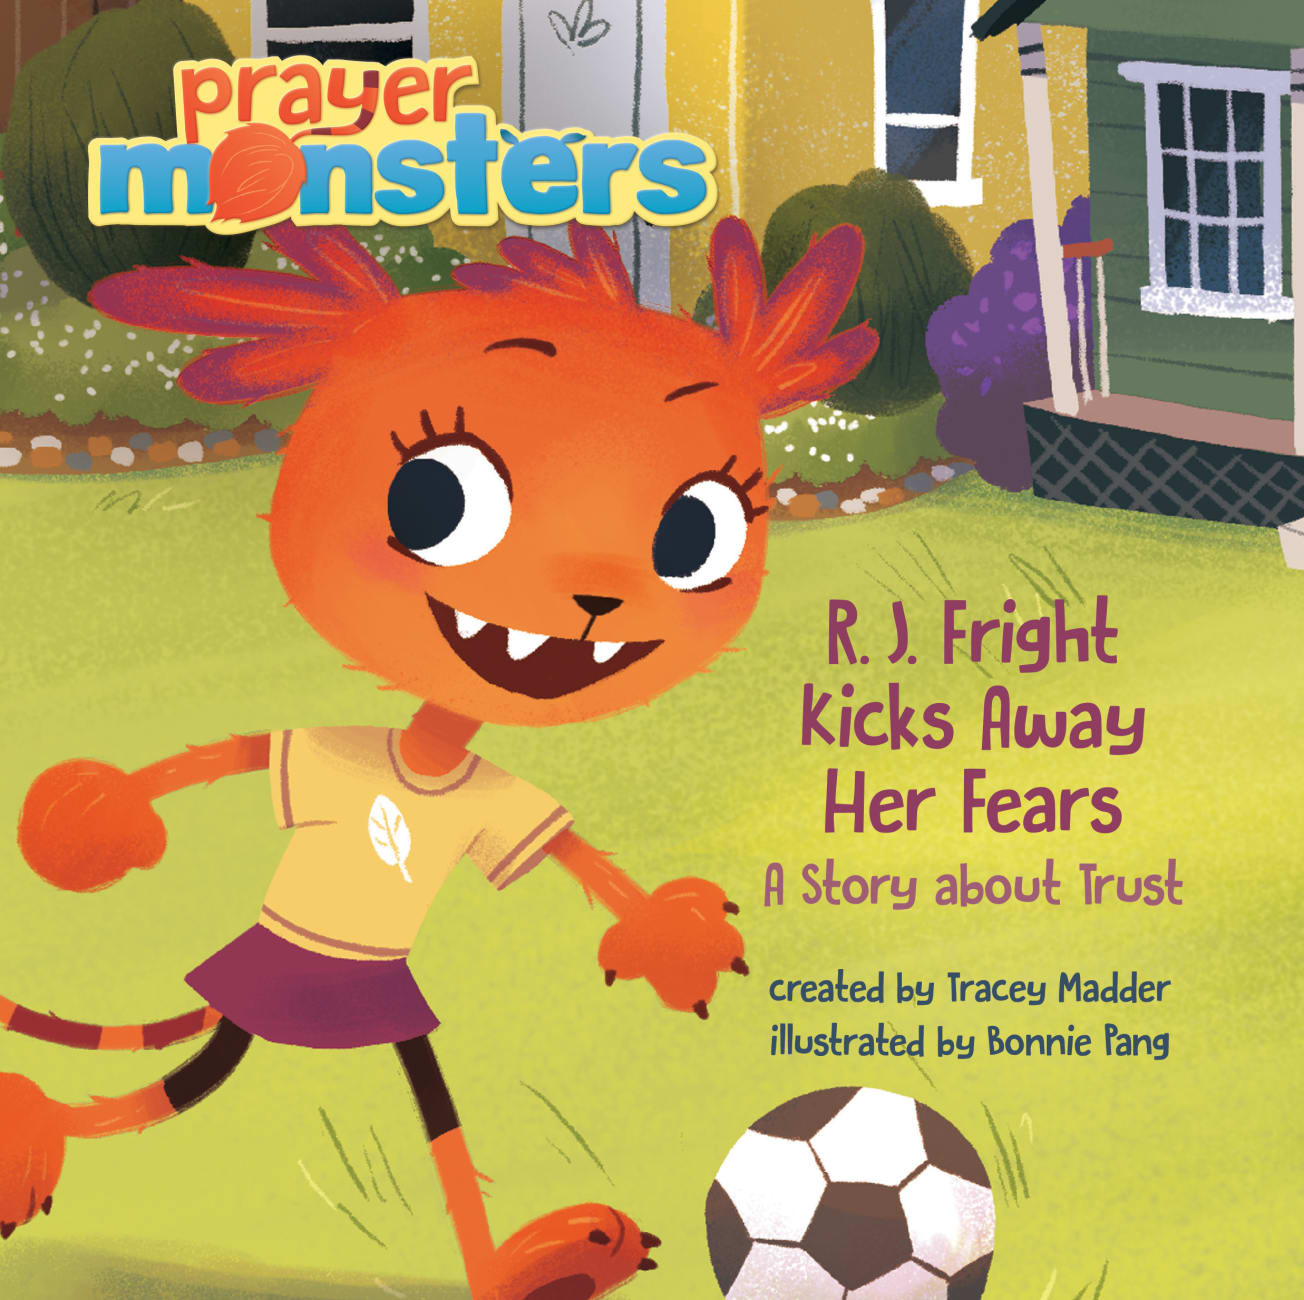 R. J. Fright Kicks Away Her Fears: A Story About Trust (Prayer Monsters Series) Hardback